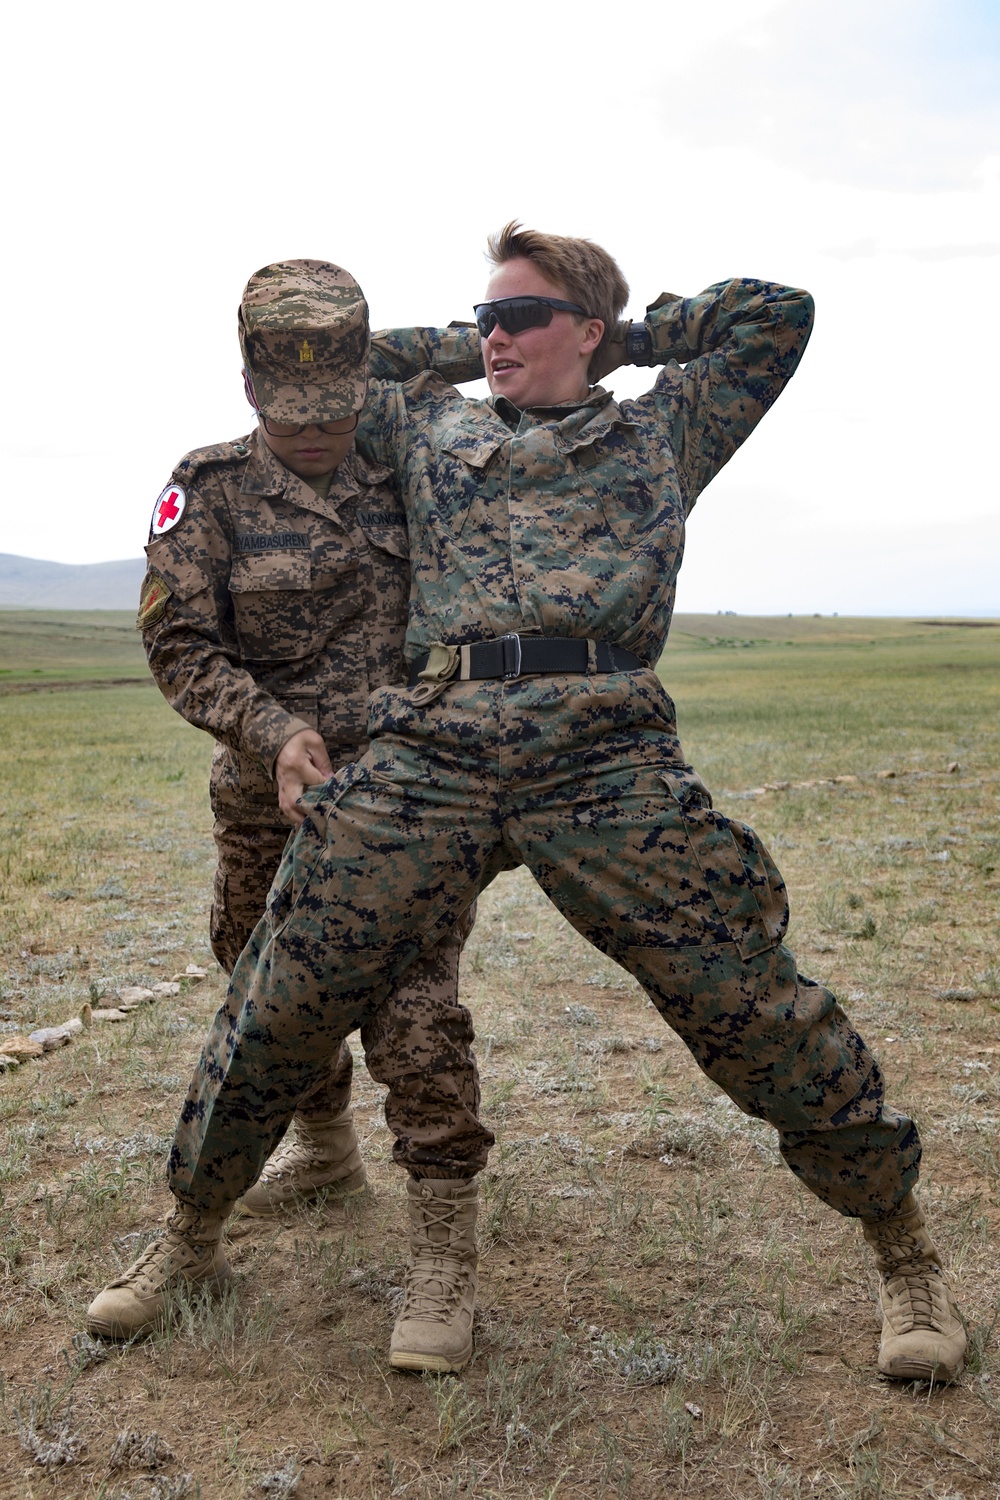 A Mongolian Armed Forces soldier searches U.S Marine Corps Sgt. Arielle Lahtinen.